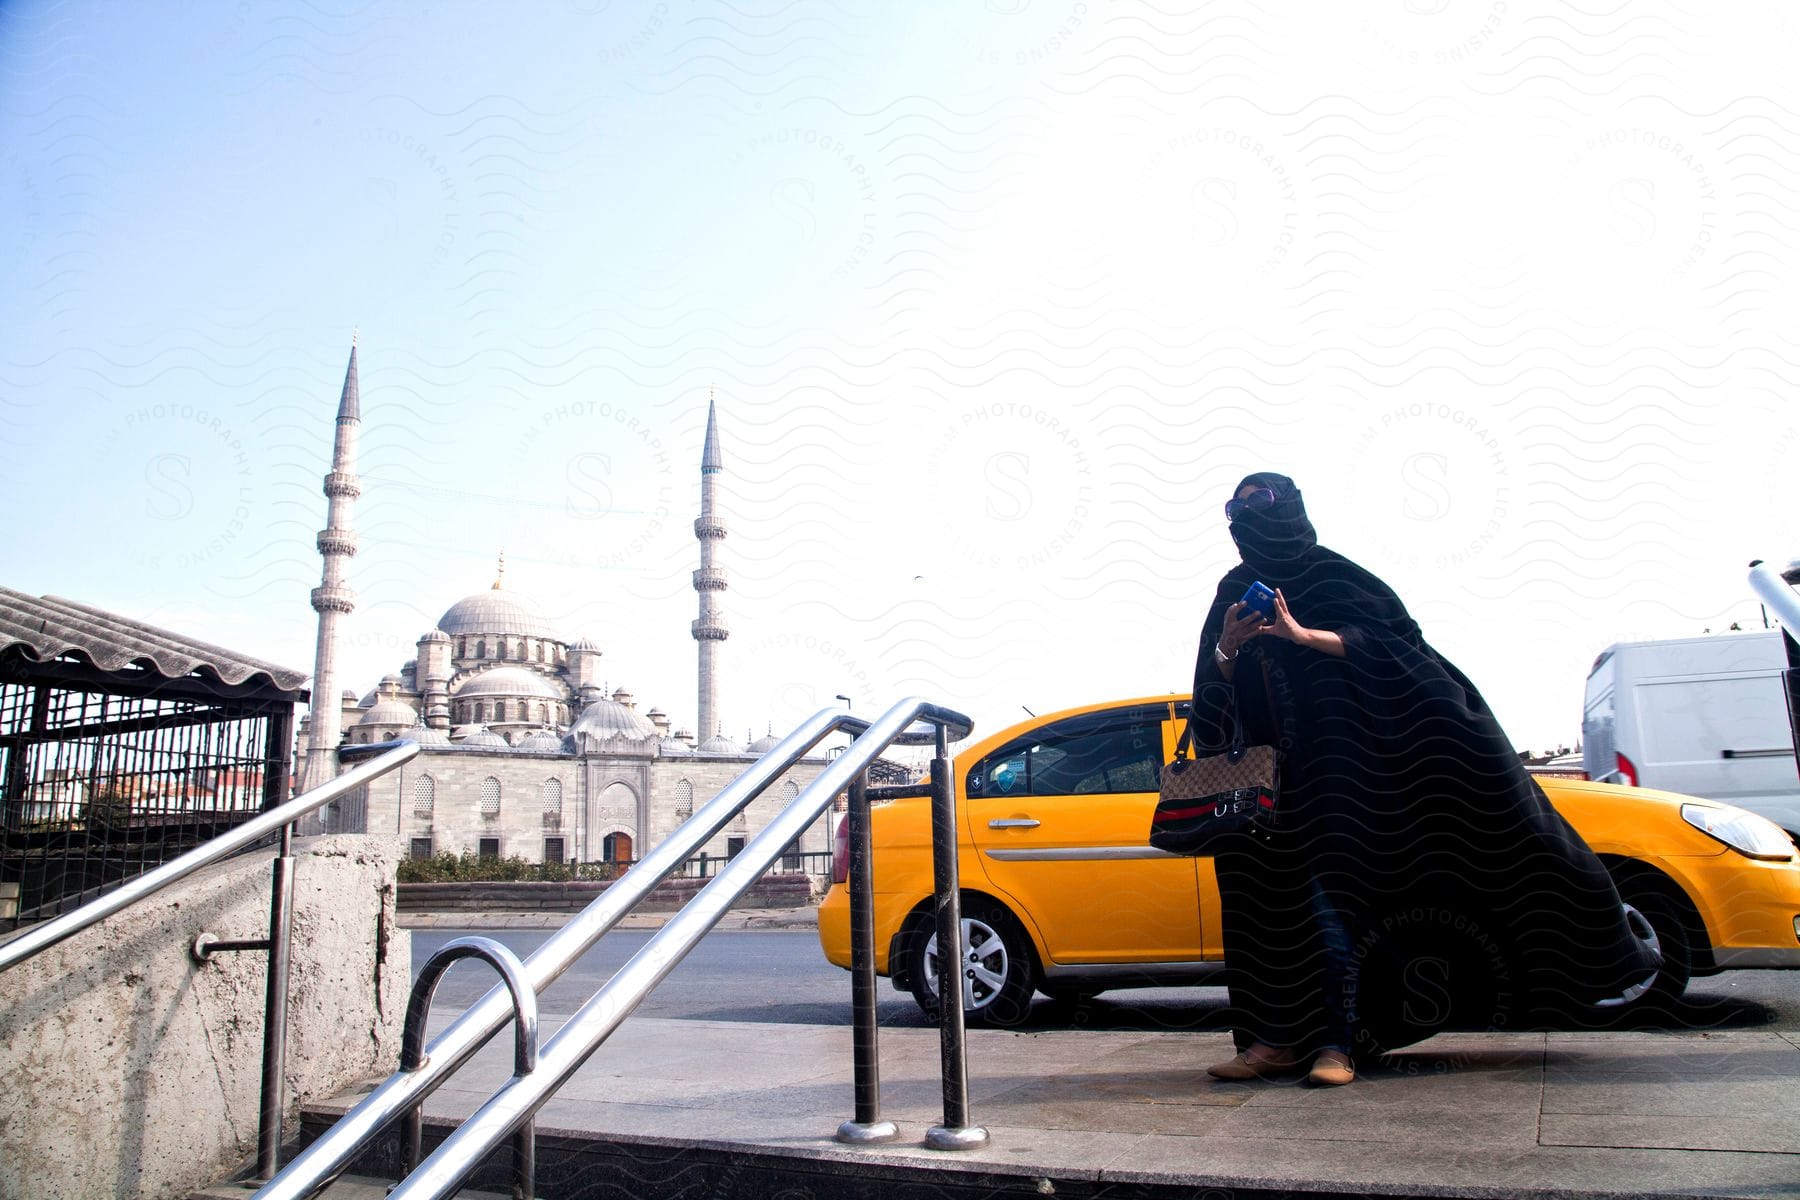 A woman in a black burqa walks out of a yellow car towards the stairs in front of a mosque